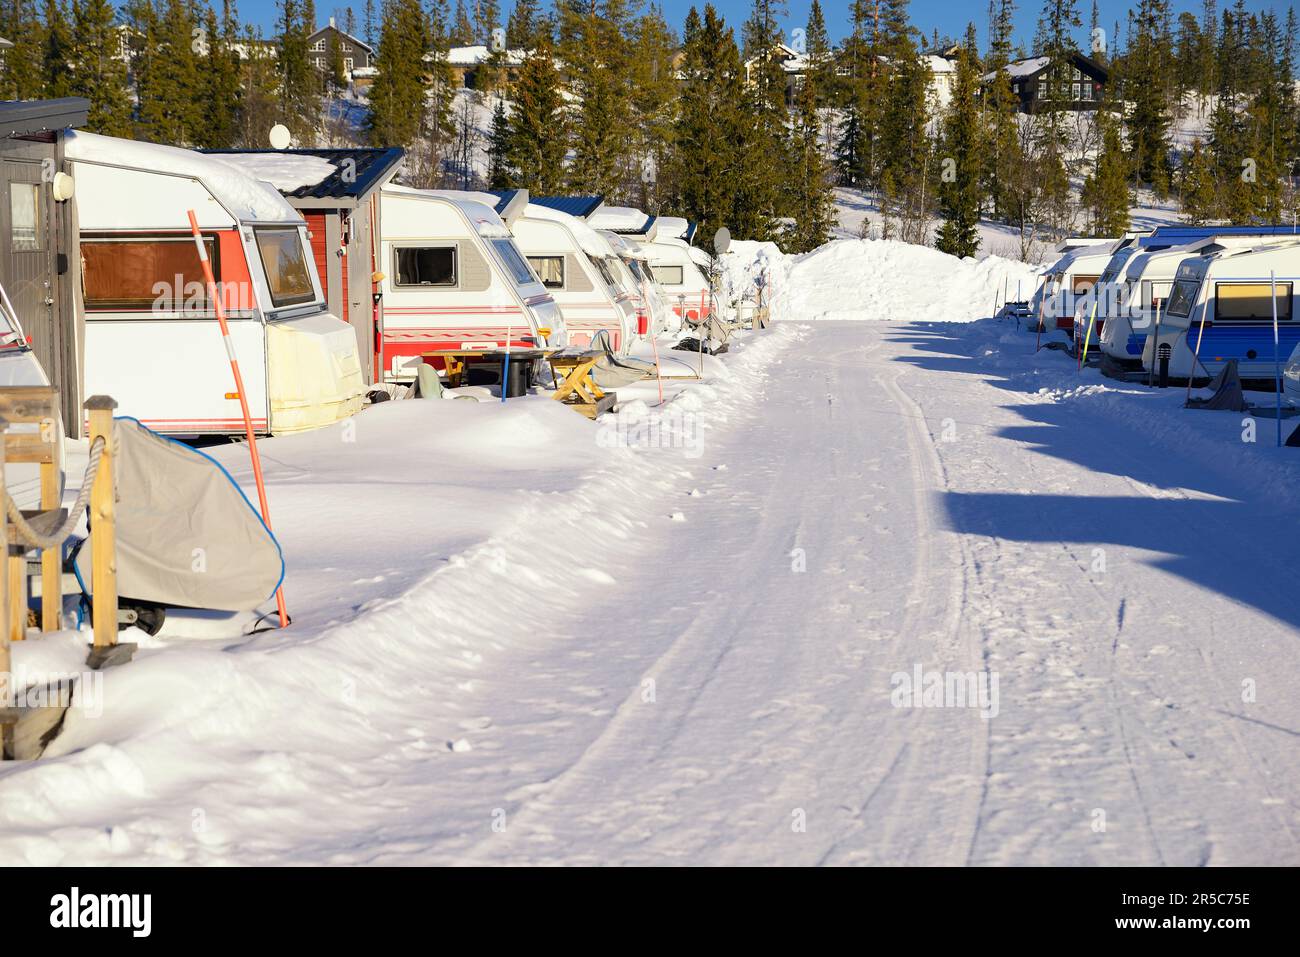 Snowy Winter camping with trailer Stock Photo